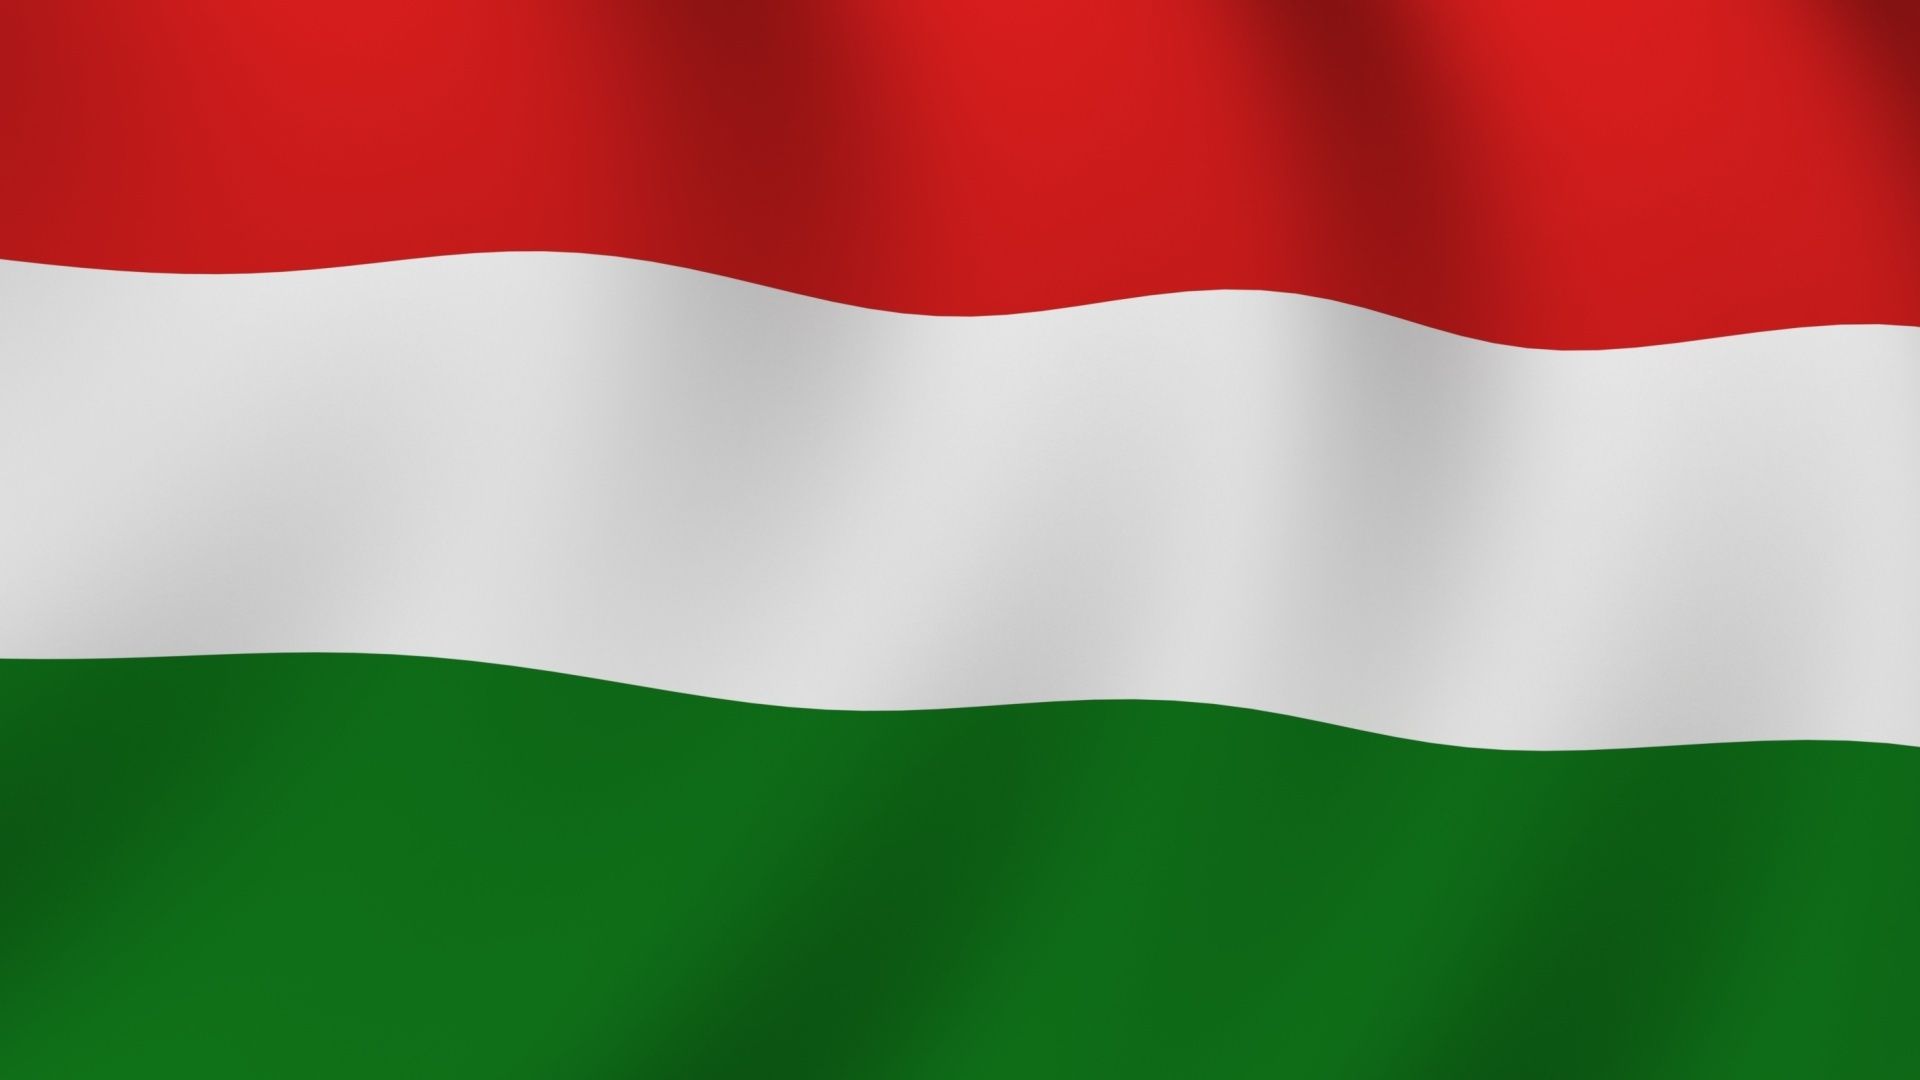 Free download hungary flag background wallpaper wallpaper 1920x1080 [1920x1080] for your Desktop, Mobile & Tablet. Explore Flag Background Wallpaper. HD Flag Wallpaper, Russian Flag Wallpaper Background, Free Flag Wallpaper